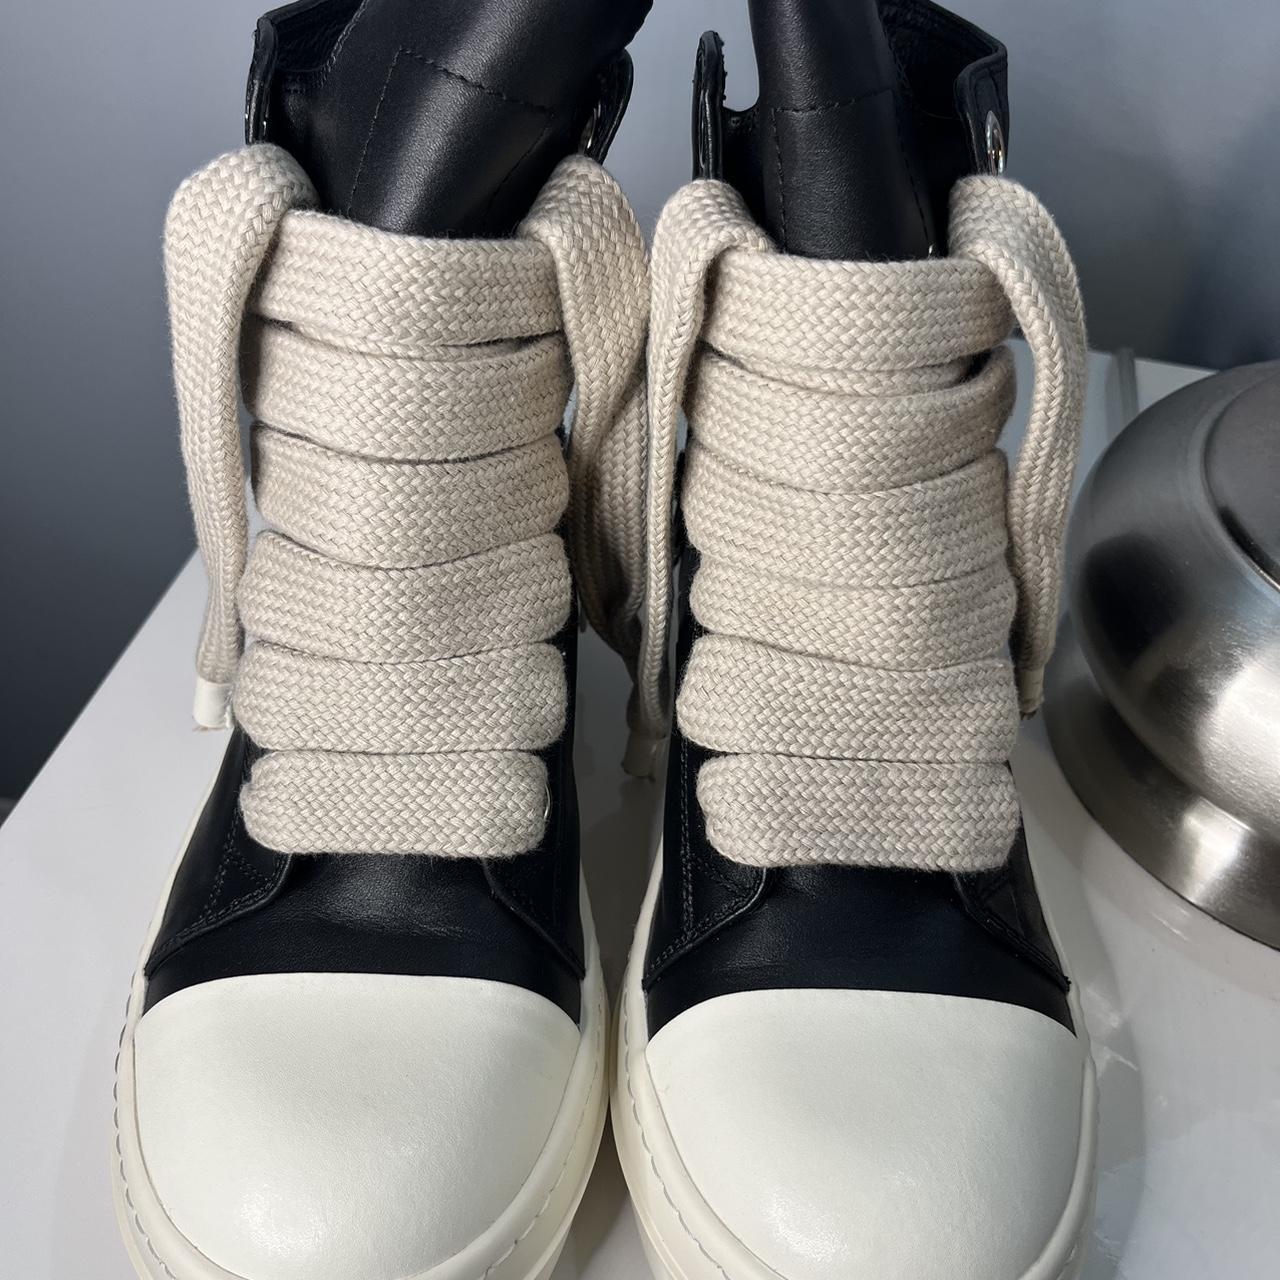 Rick Owens, thick, laced shoe Condition: worn a... - Depop